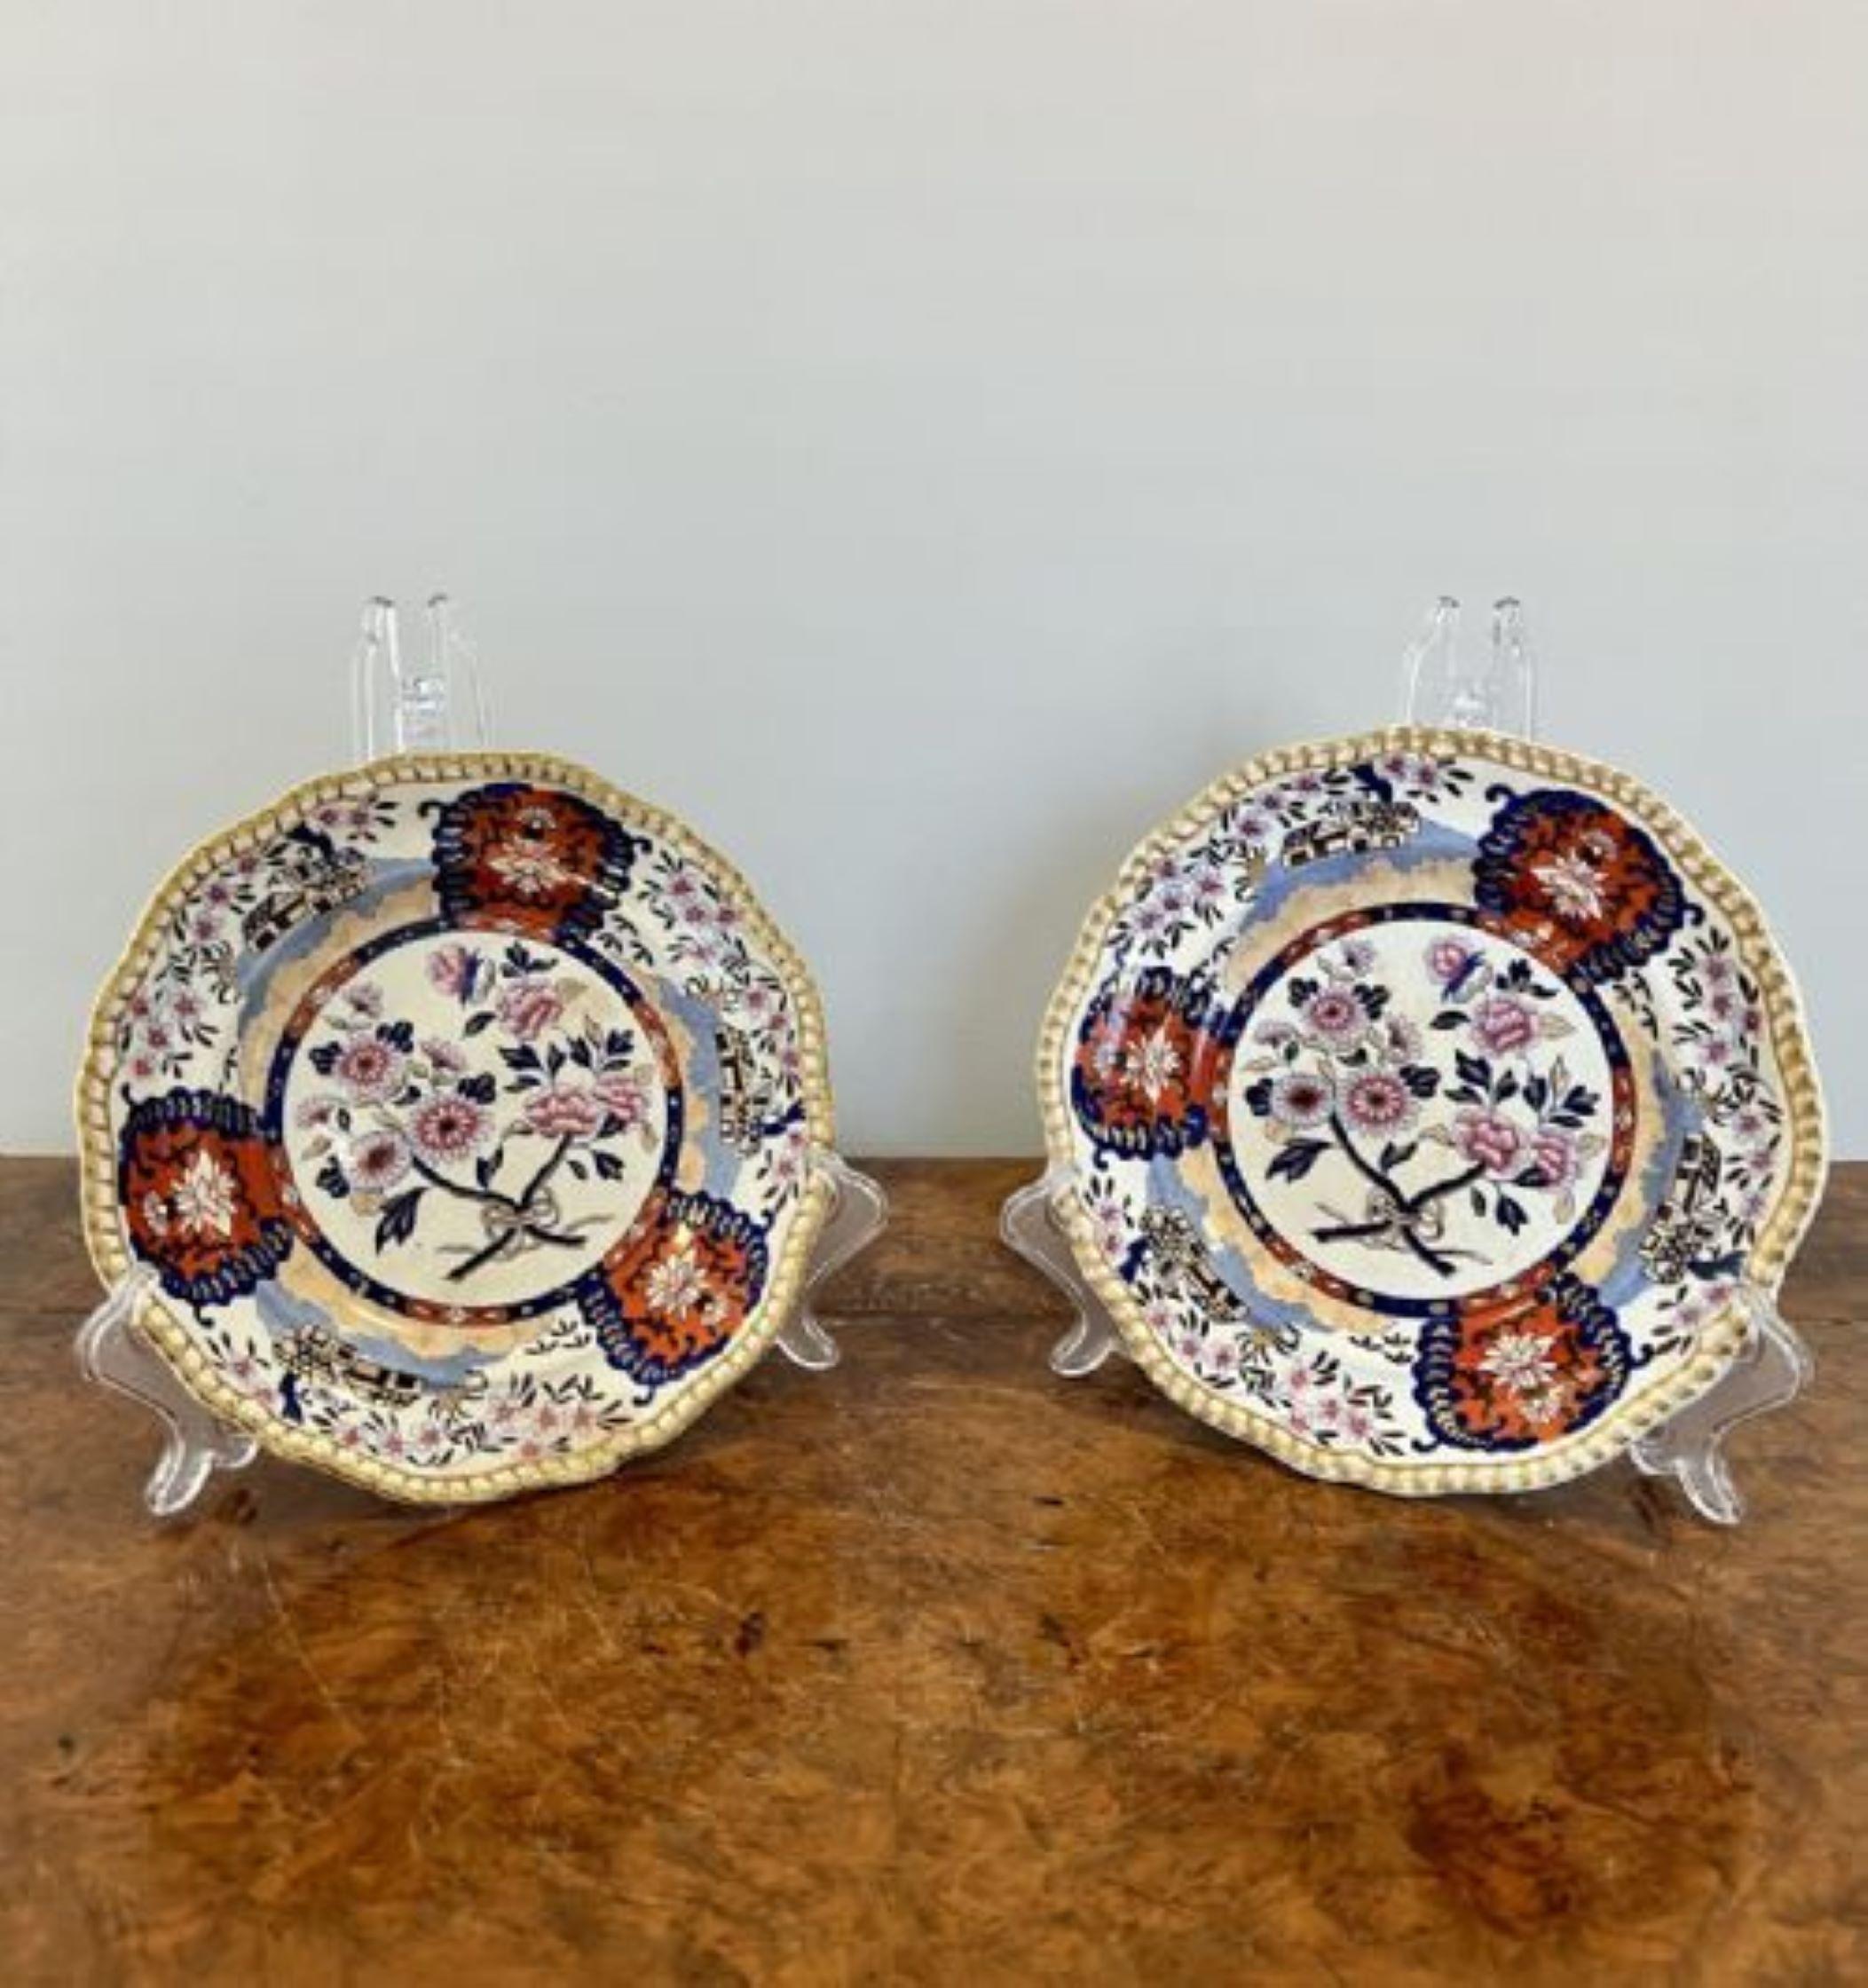 Lovely set of six antique Spode plates, set of six Spode imperial hand painted plates decorated with flowers, houses leaves and trees in wonderful orange, pink, blue colours with a gold gilded edge